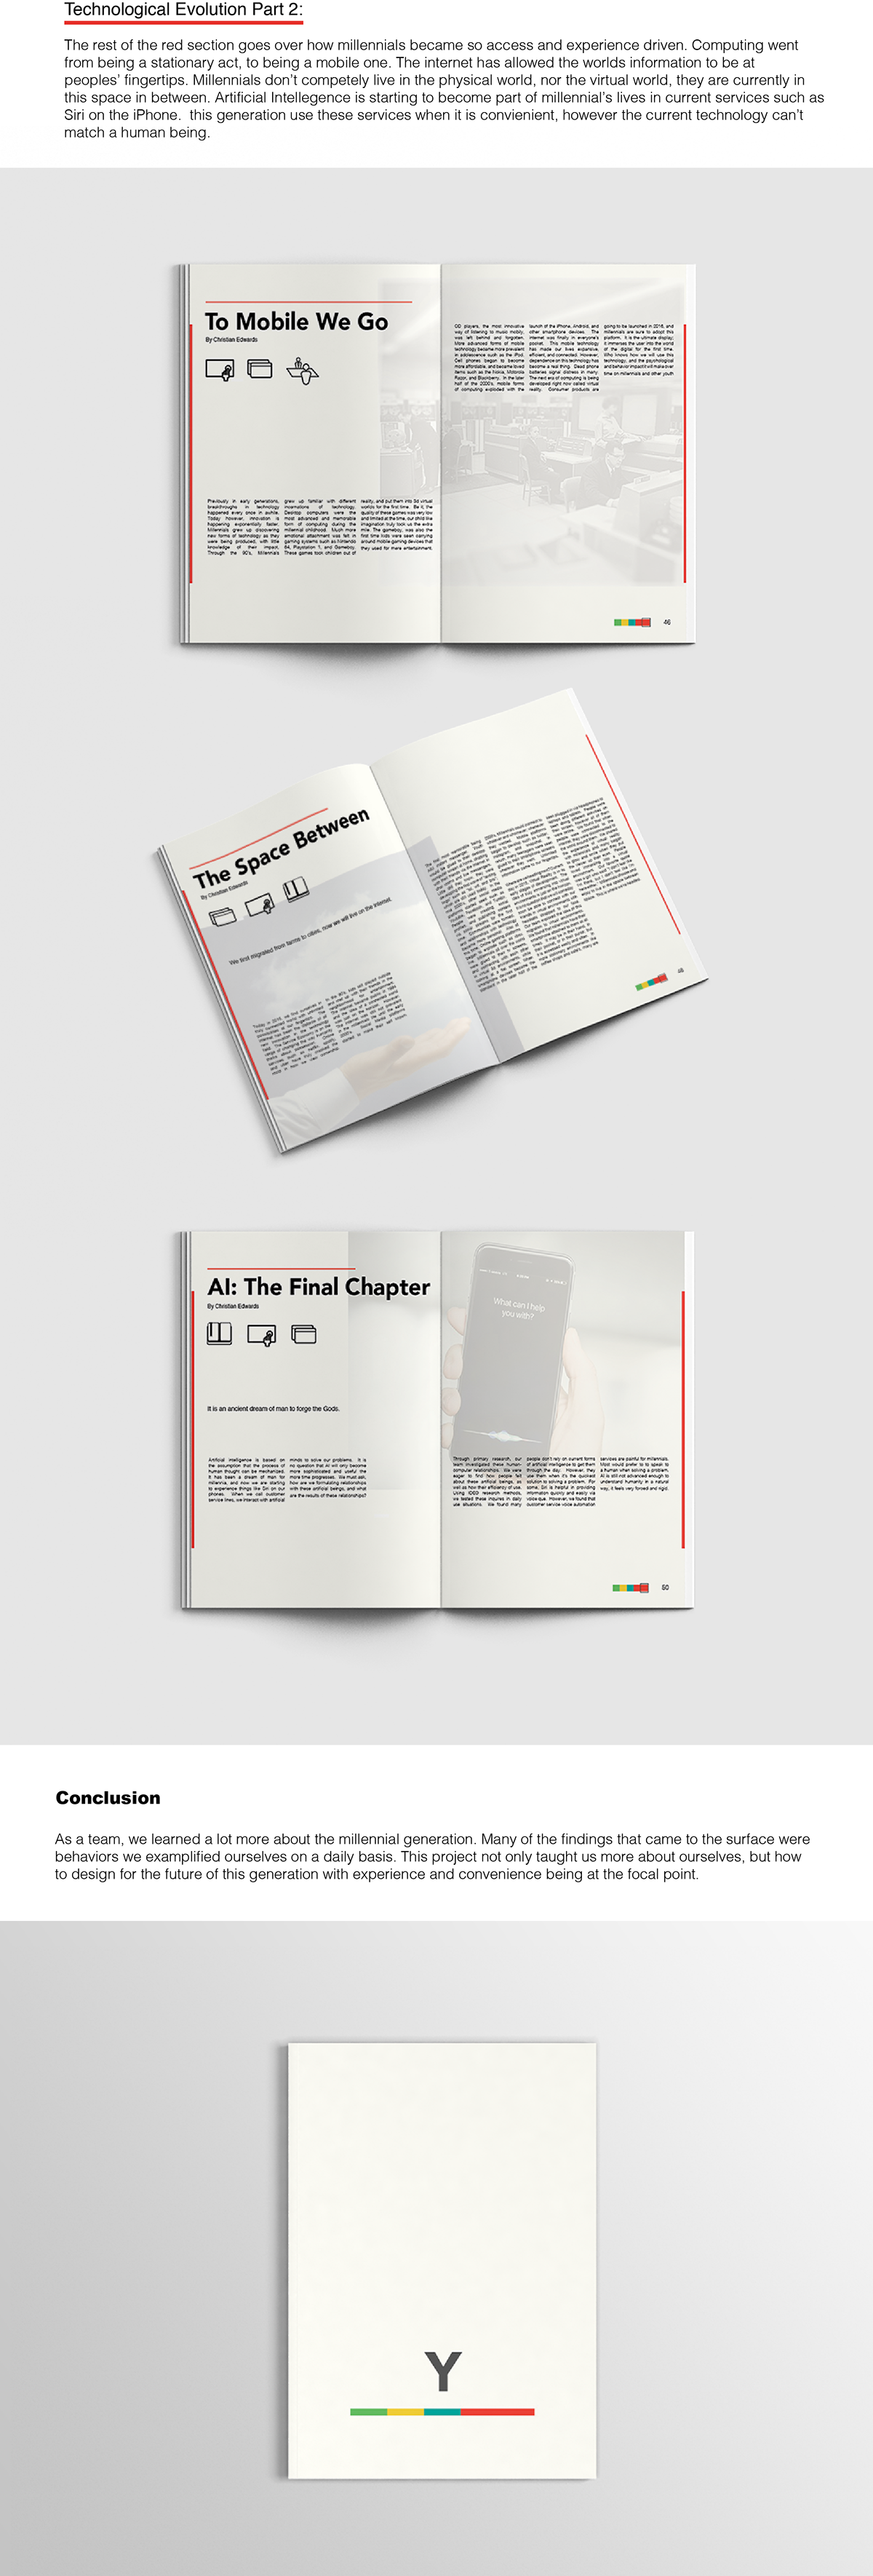 magazine Guide manual generation y millennial research process timeline material ideo ux service bold minimal